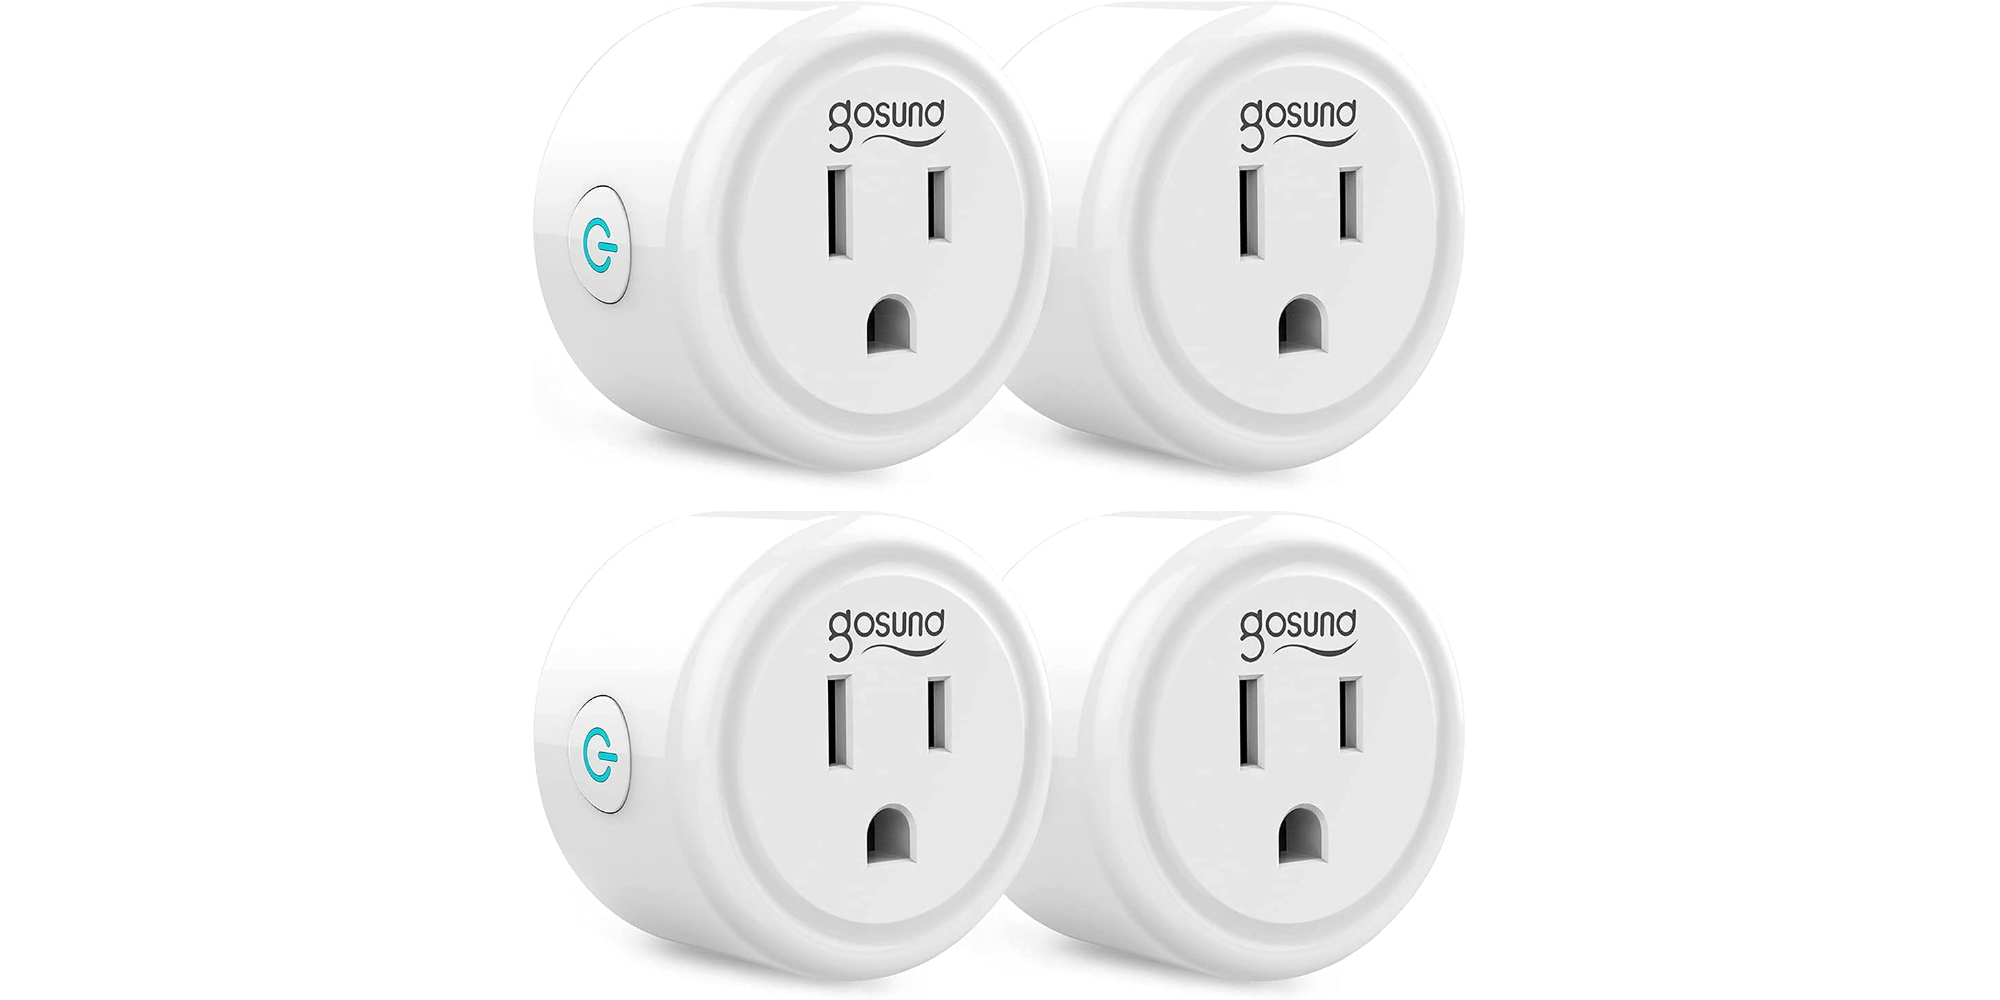 Gosund's 4pack of WiFi mini smart plugs are just 4 each when you